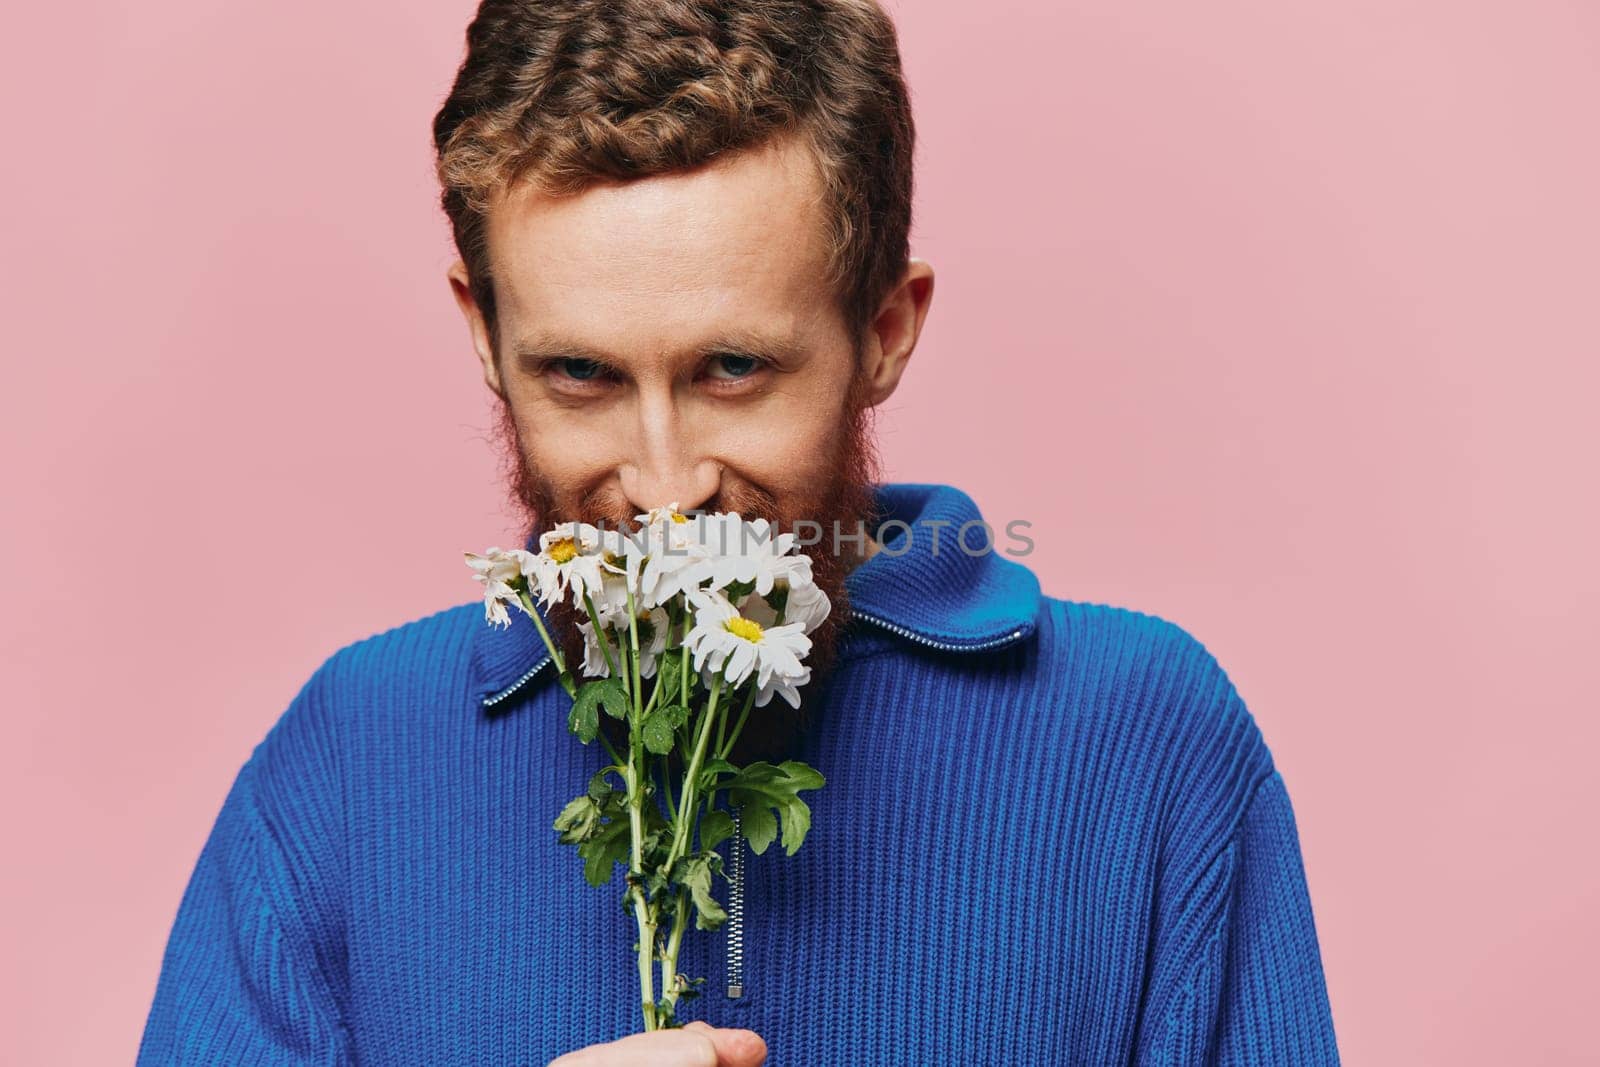 Portrait of a funny man smiling with a bouquet of flowers daisies on pink isolated background, copy place. Holiday concept and congratulations, Valentine's Day, Women's Day. High quality photo